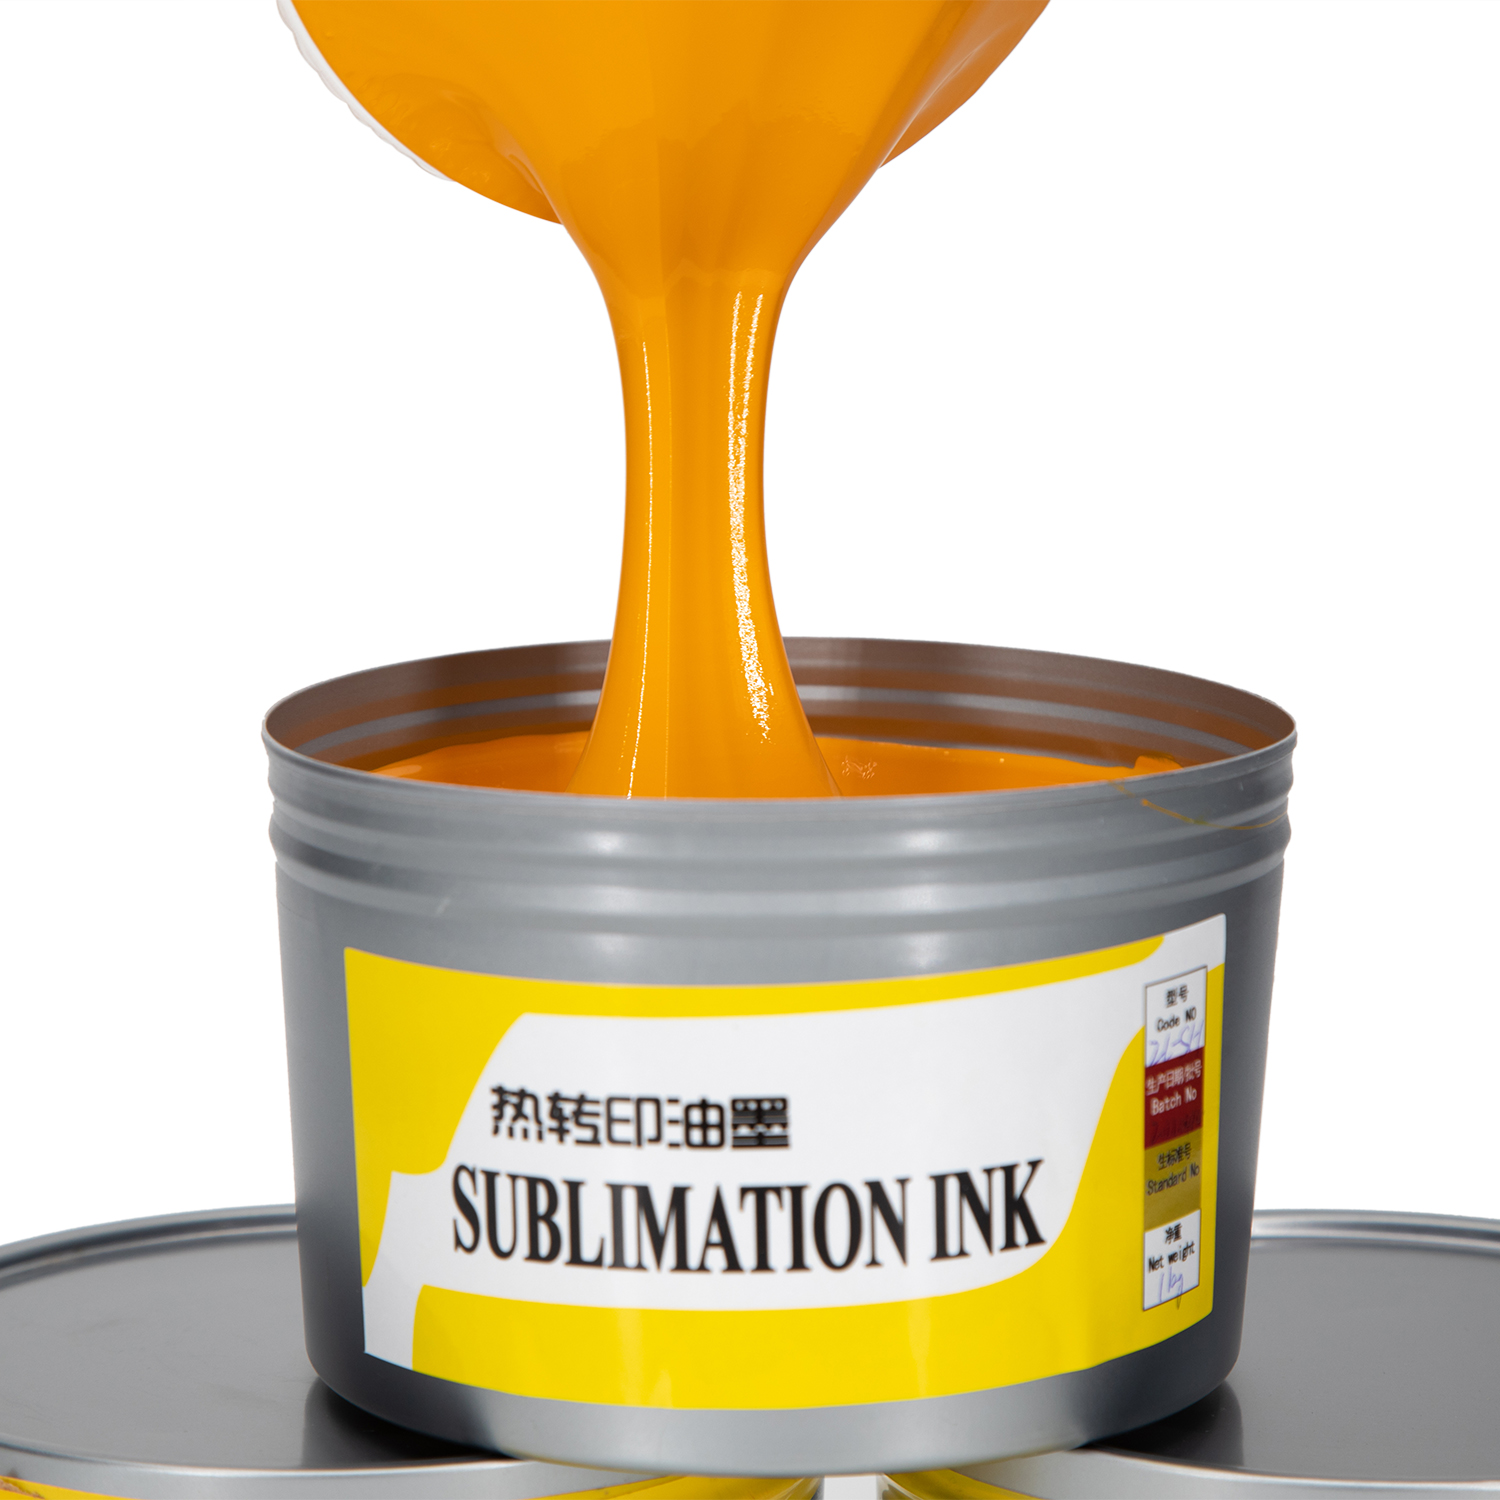 sublimation ink for offset printing about heat transfer textile printing ink